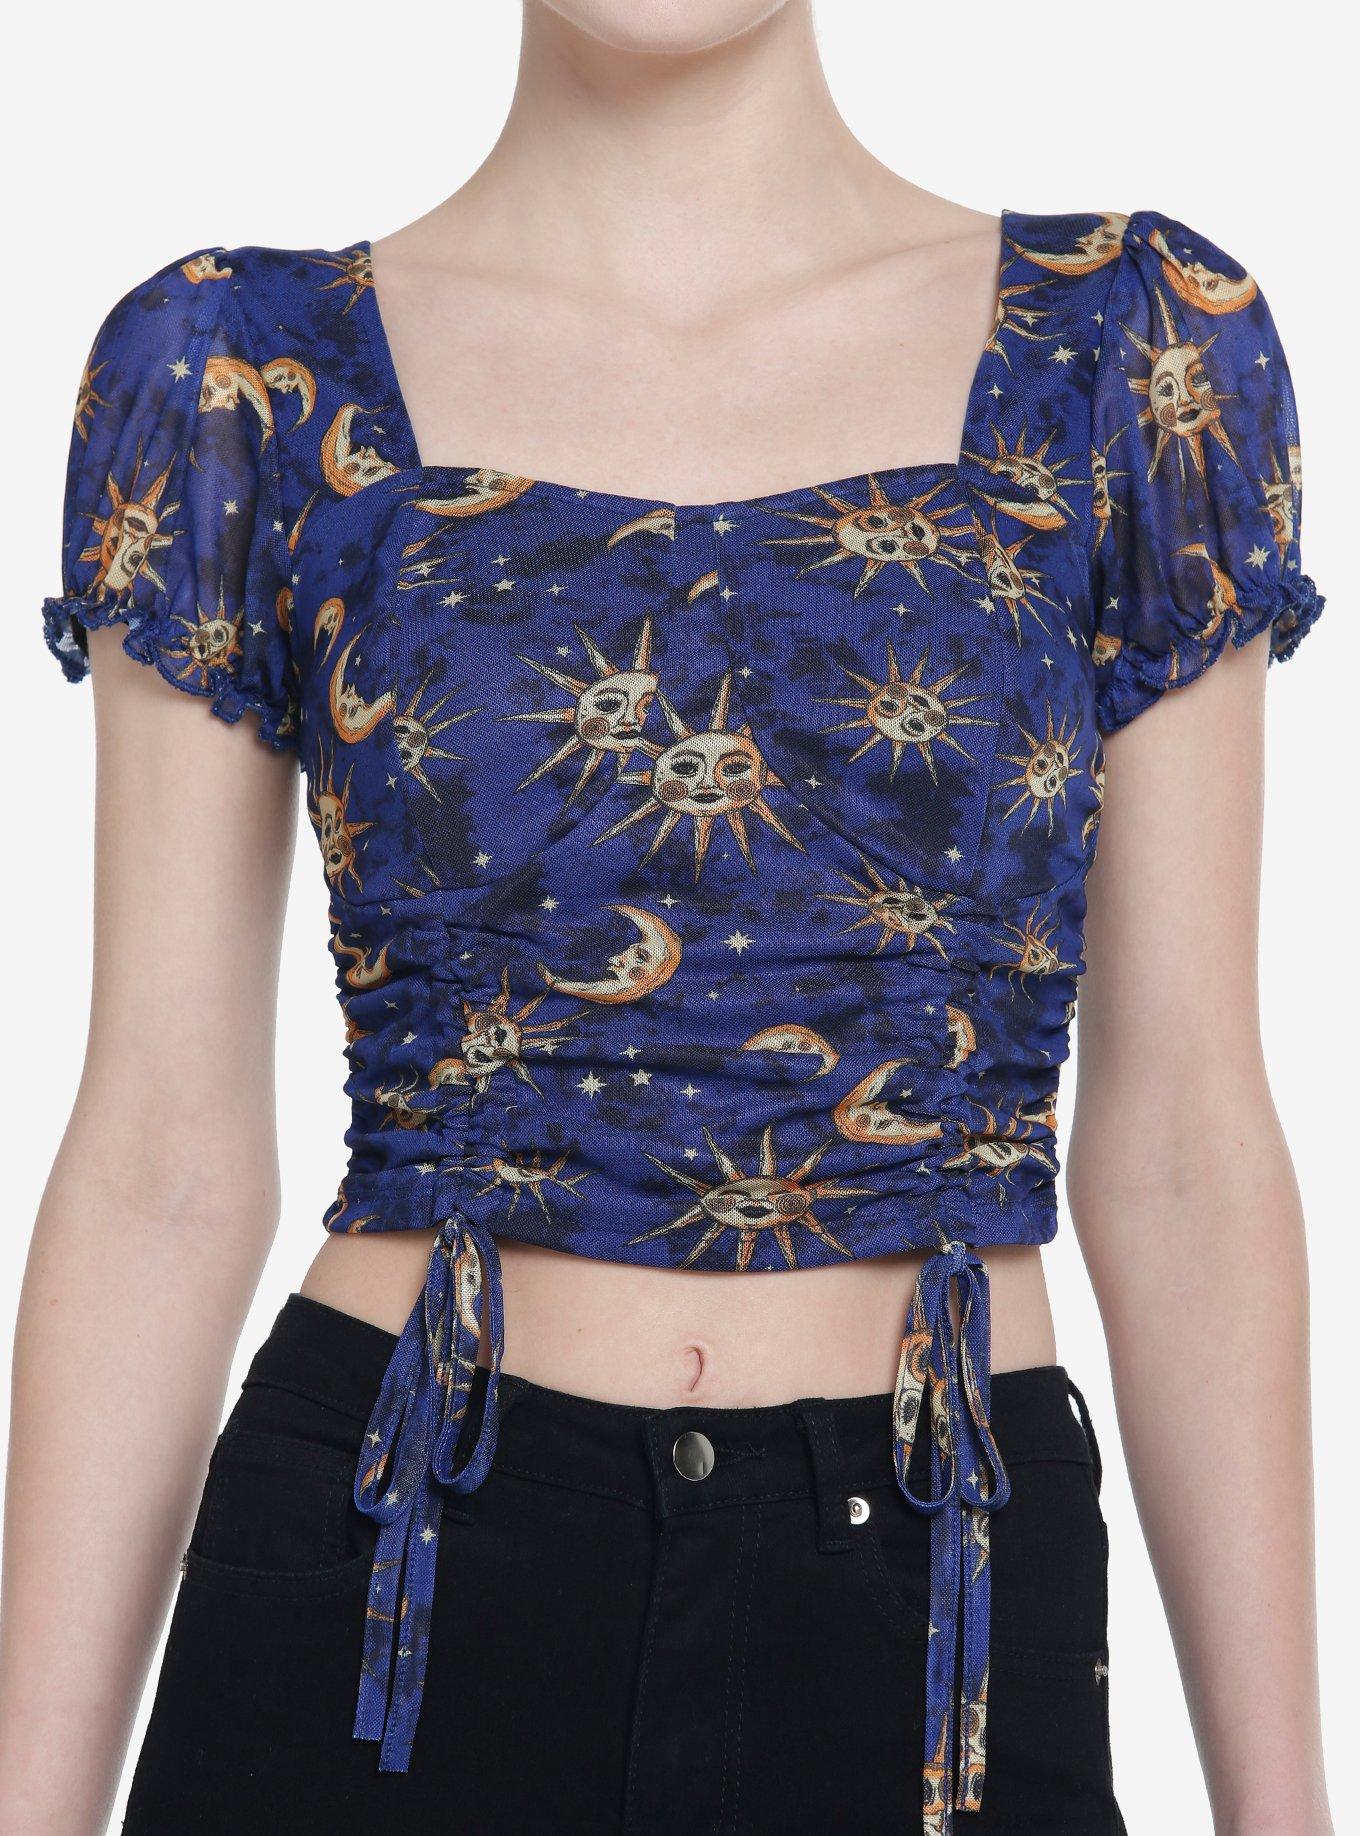 This Urban Outfitters Crop Top Was Made for Brave Souls